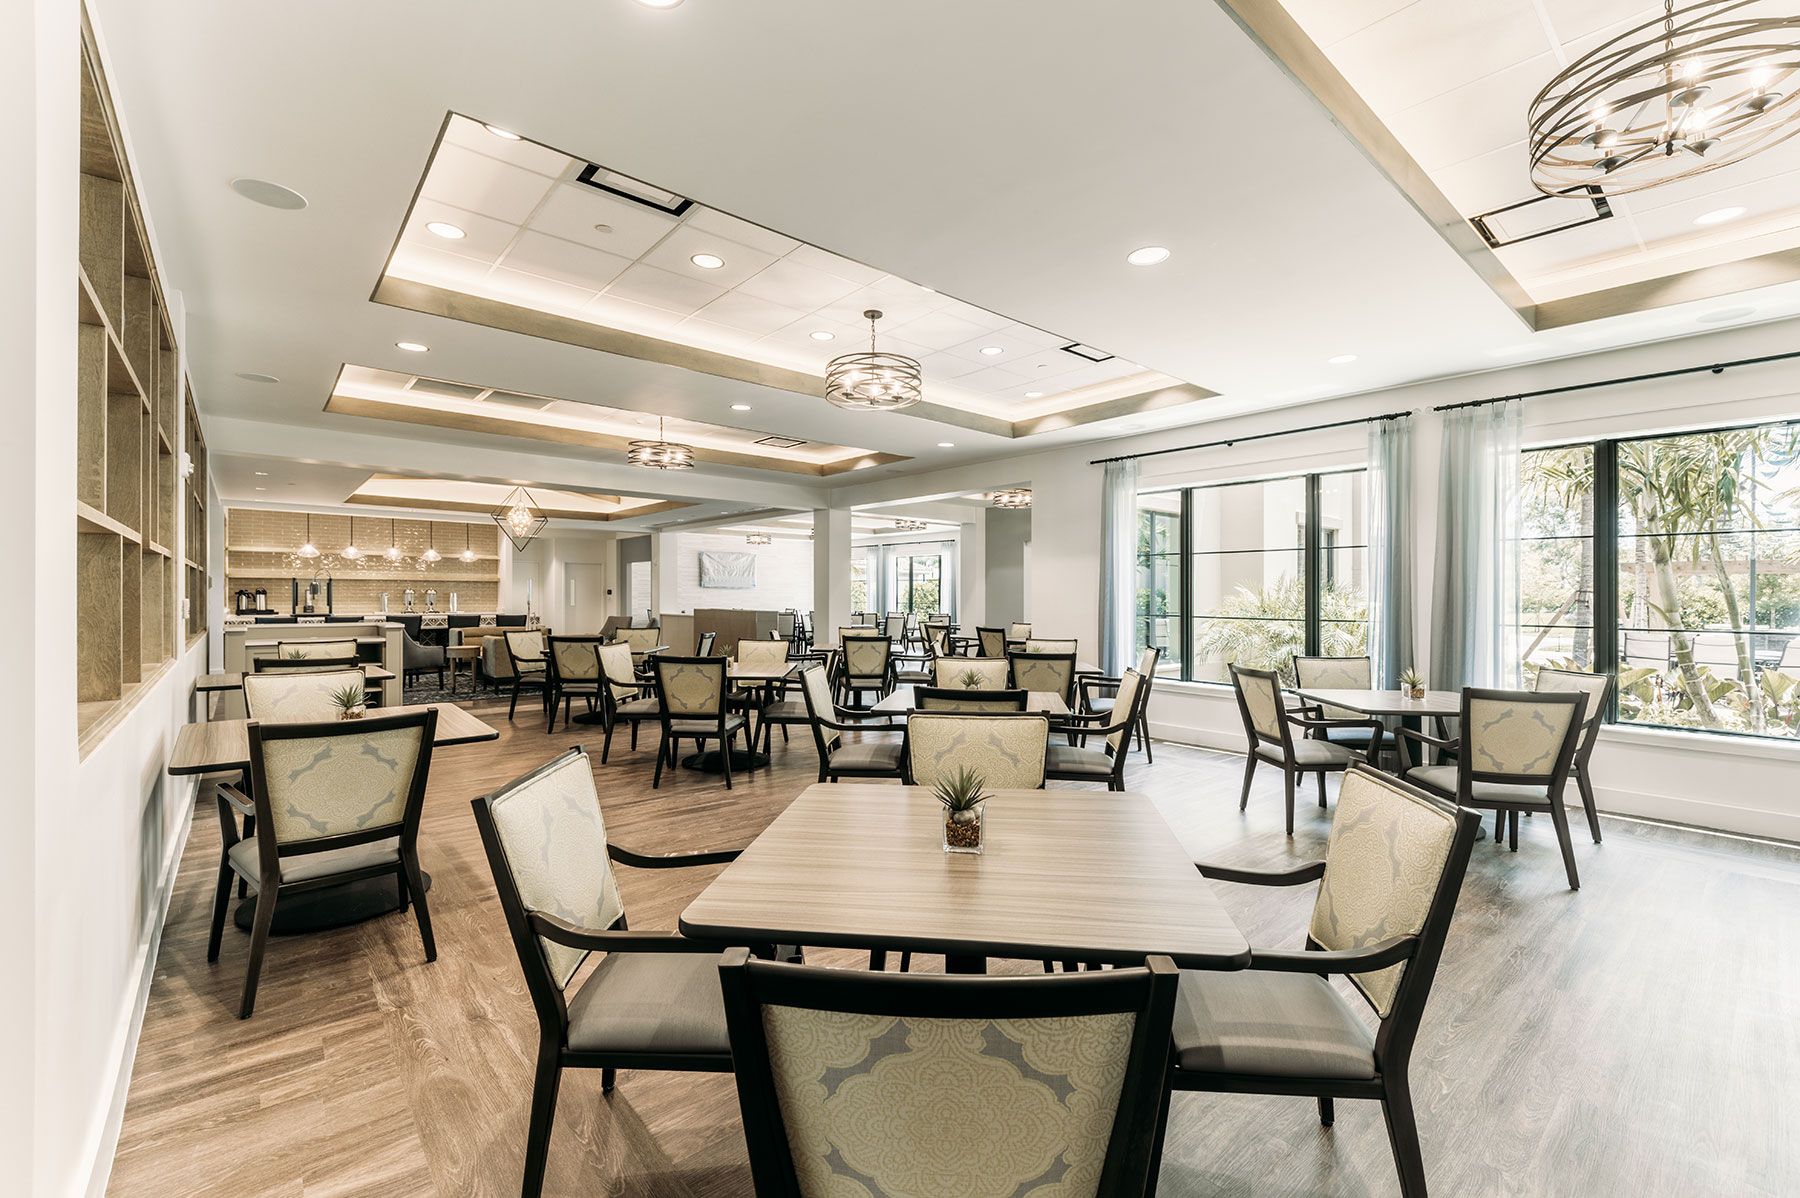 Interior view of the Capstone at Royal Palm senior living community's dining area with elegant design.